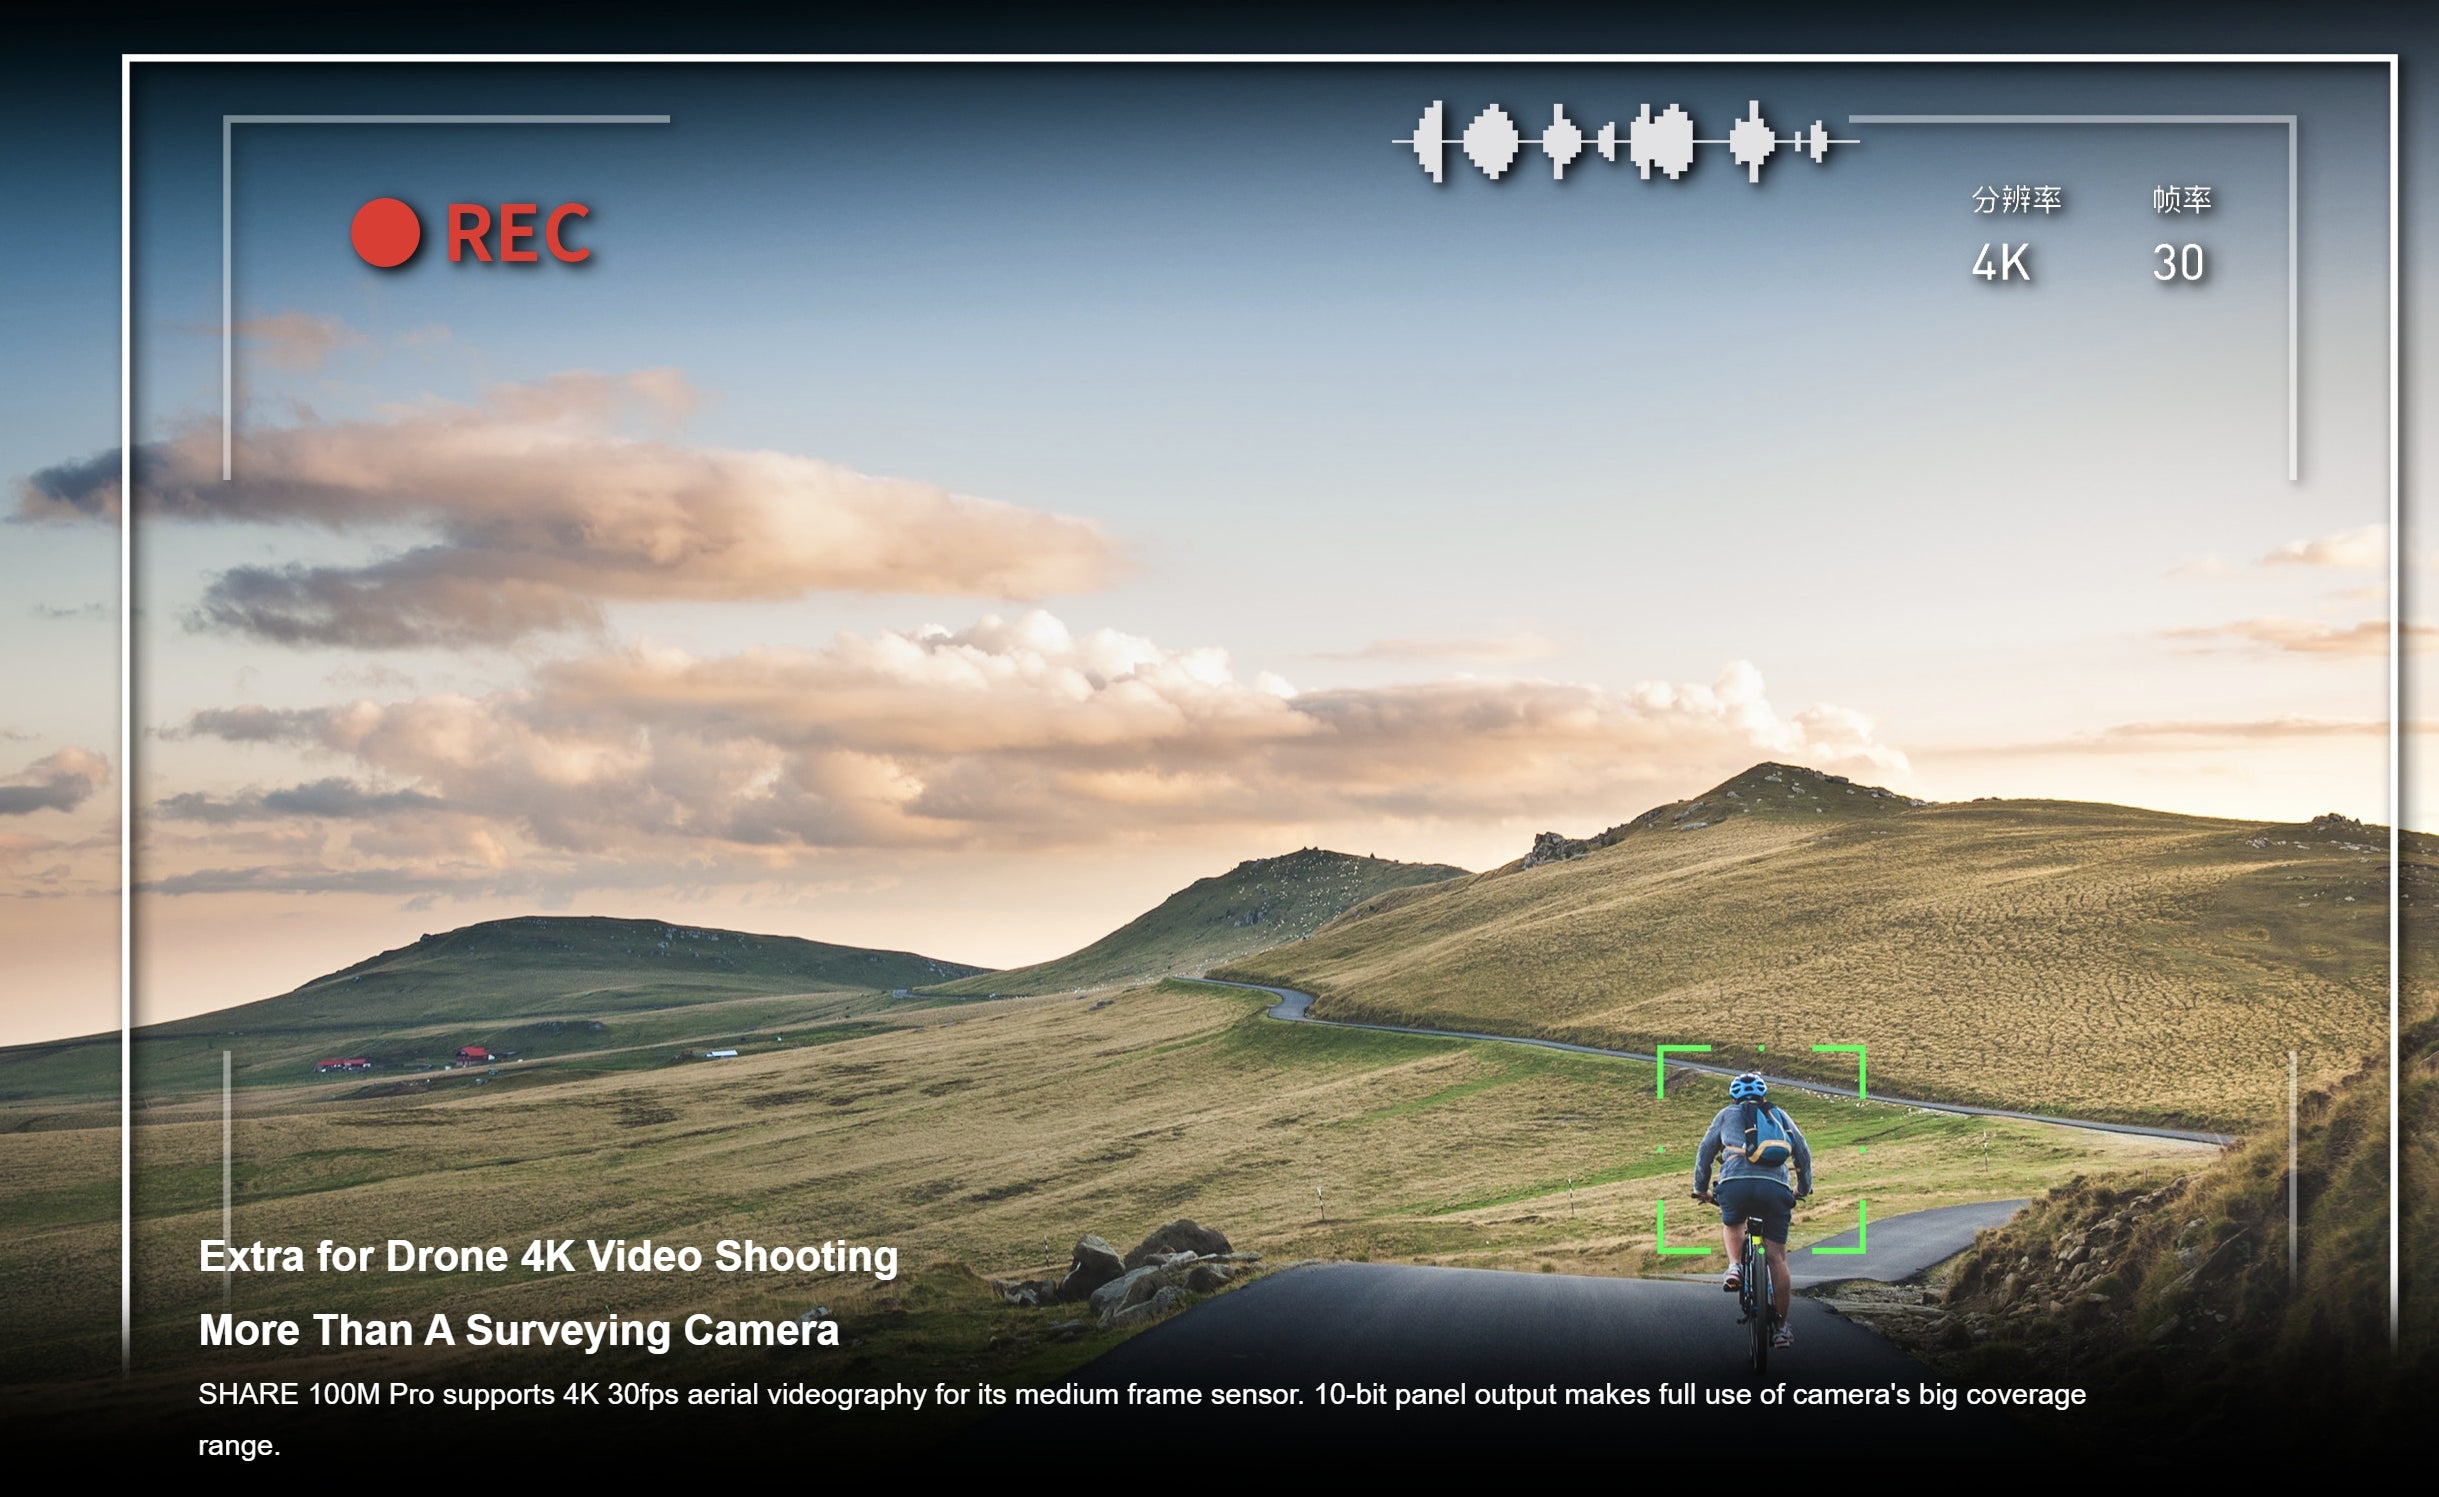 SHARE 100M Pro V2, Camera captures high-resolution images and 4K video for 3D mapping and surveying.